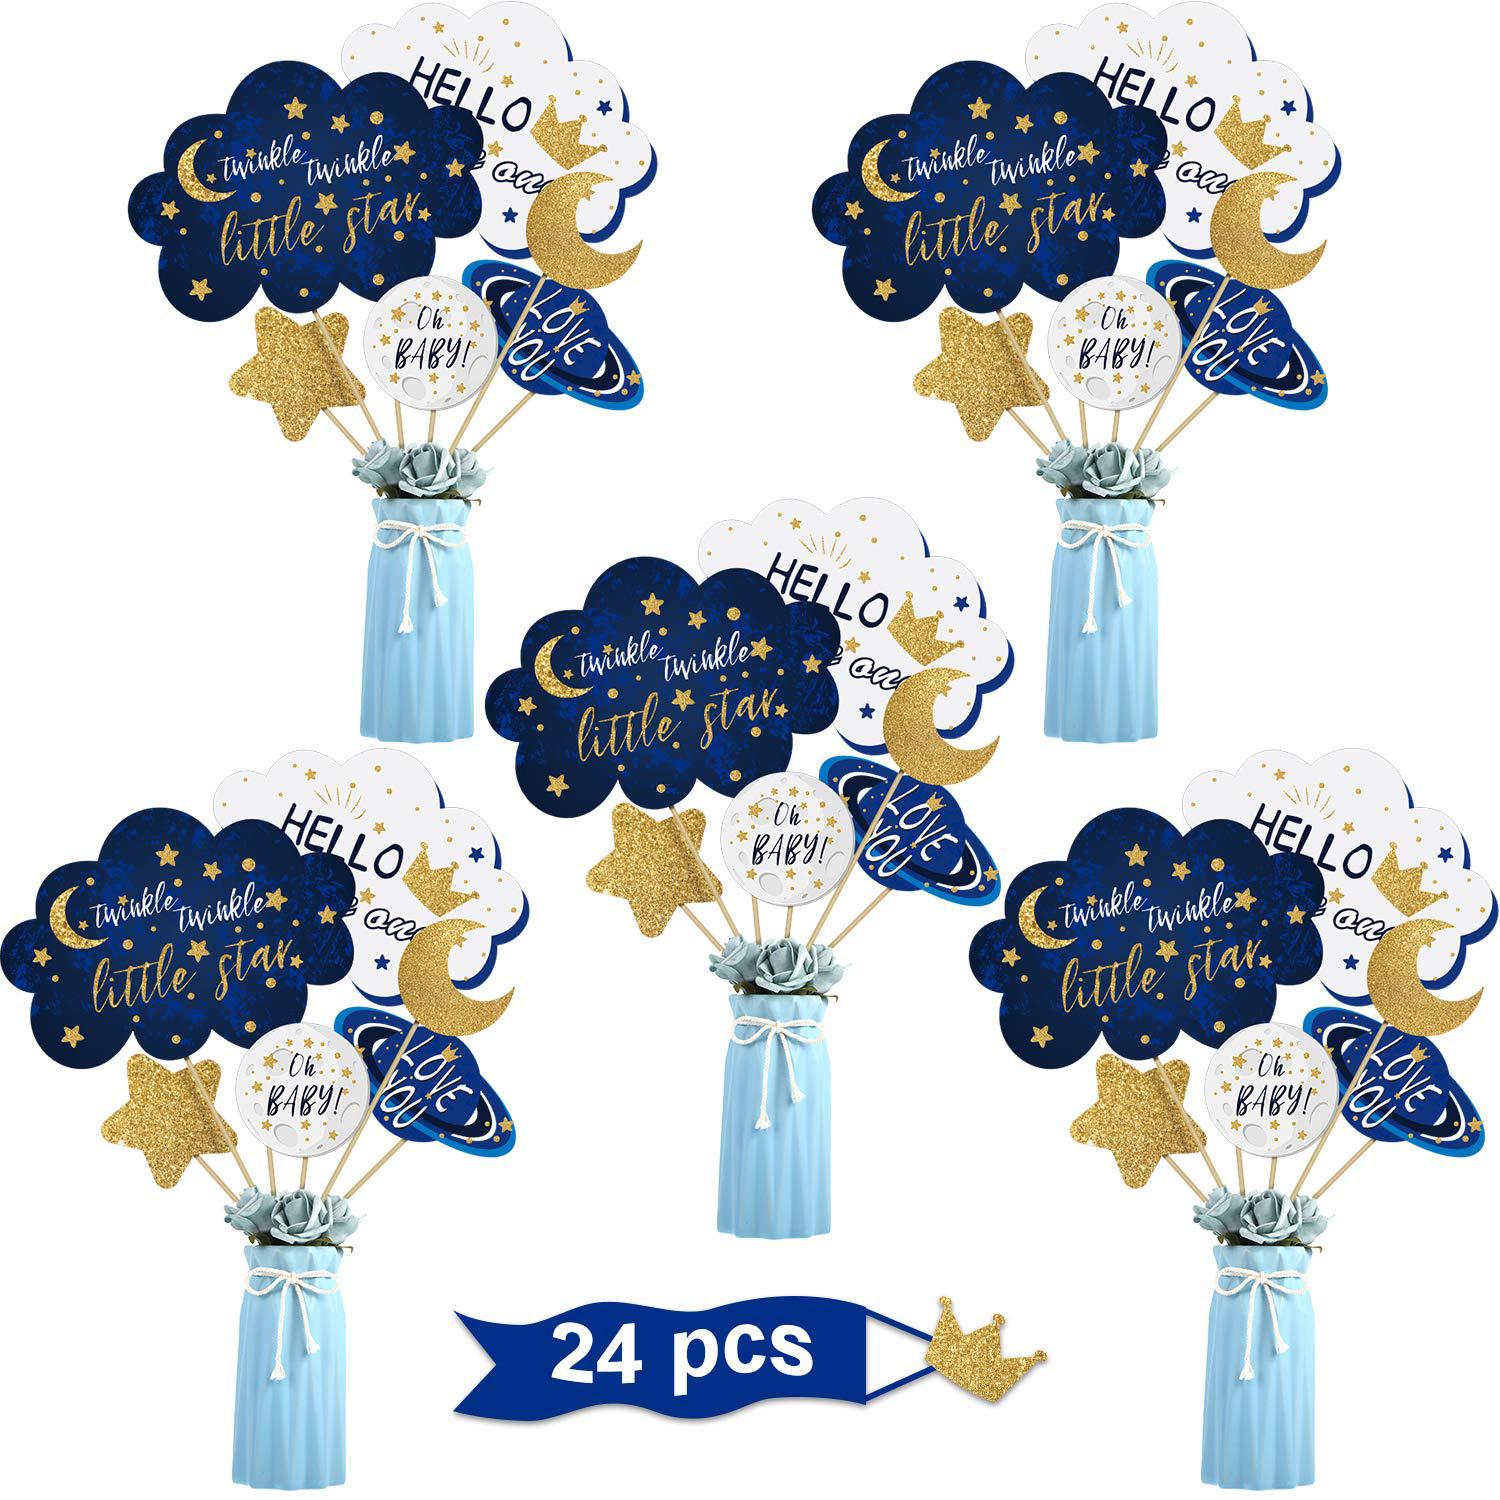 BOAO 24 pieces twinkle twinkle little star centerpiece sticks for star party table toppers birthday party decoration baby shower b